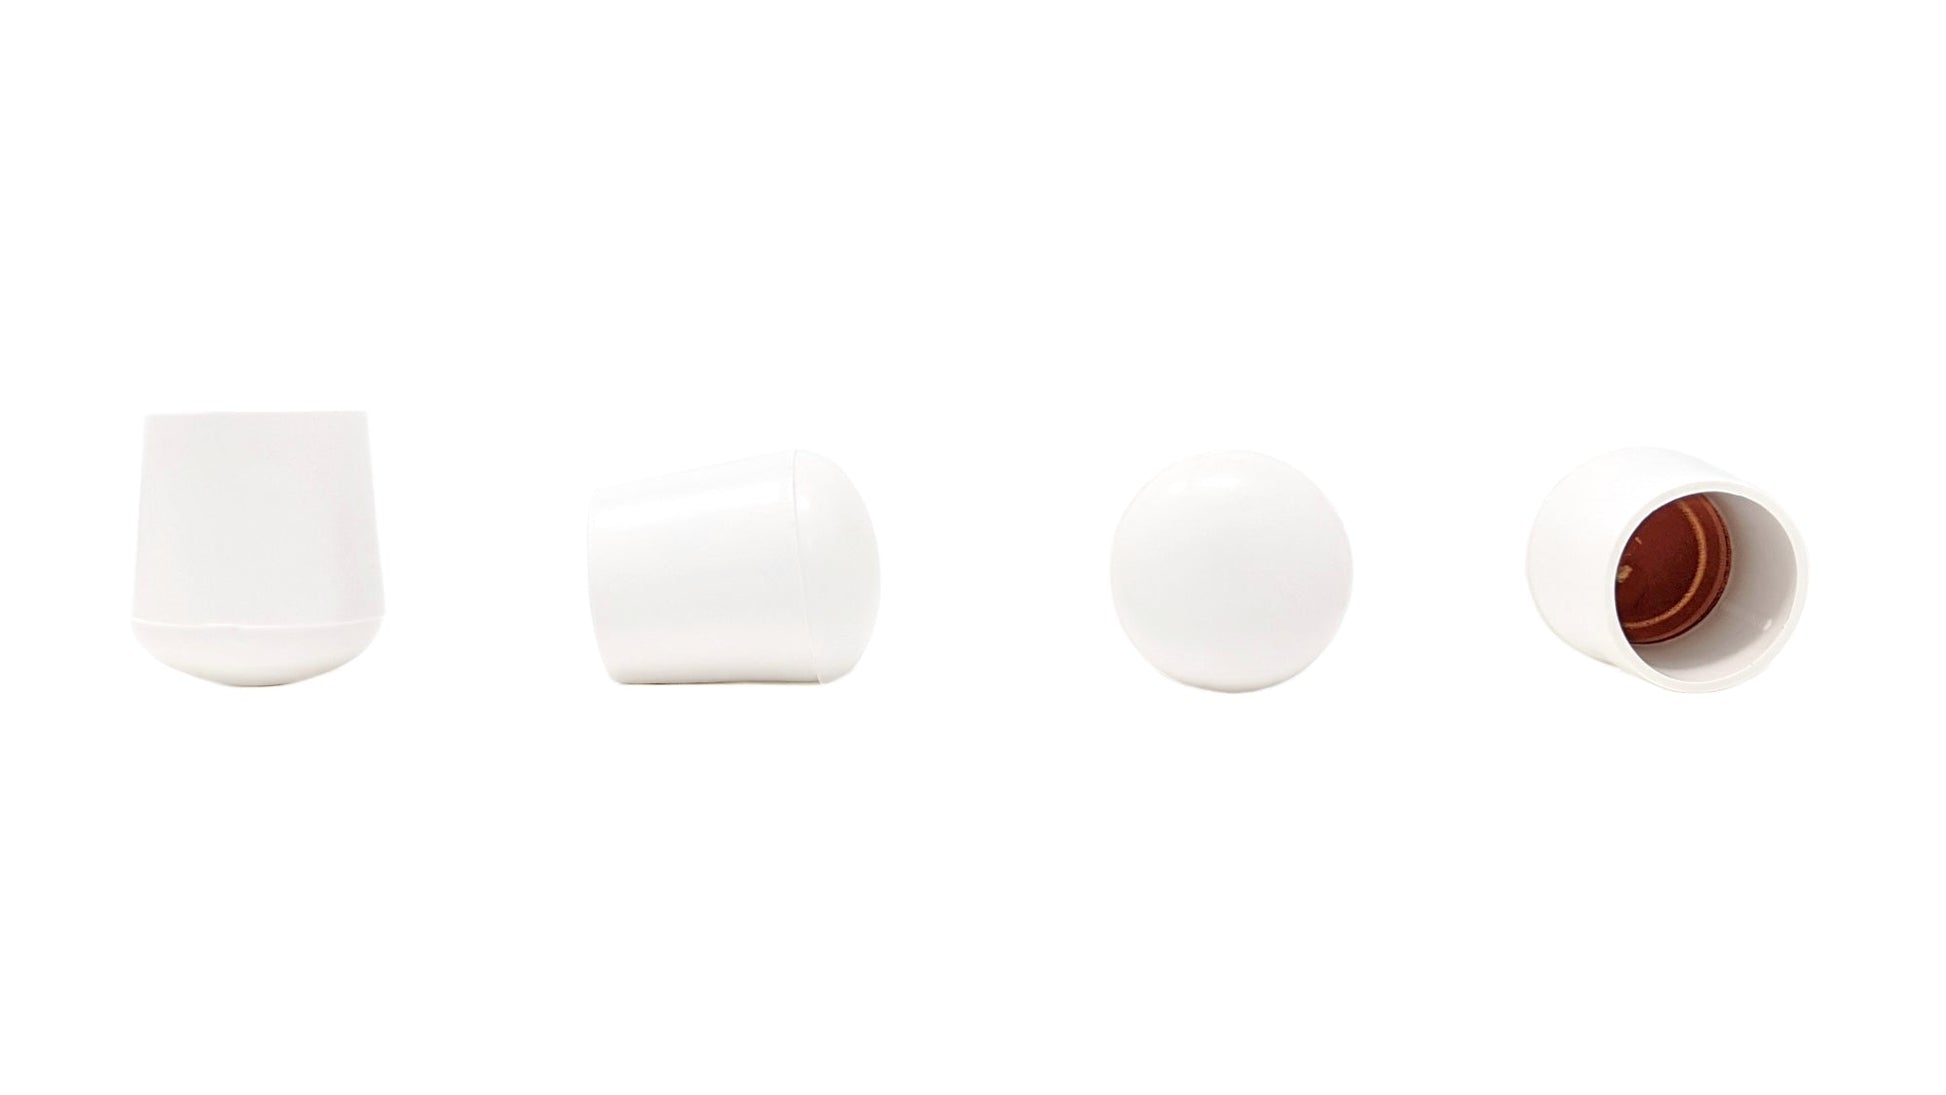 25mm White Rubber Ferrules with Steel Base Insert - Made in Germany - Keay Vital Parts